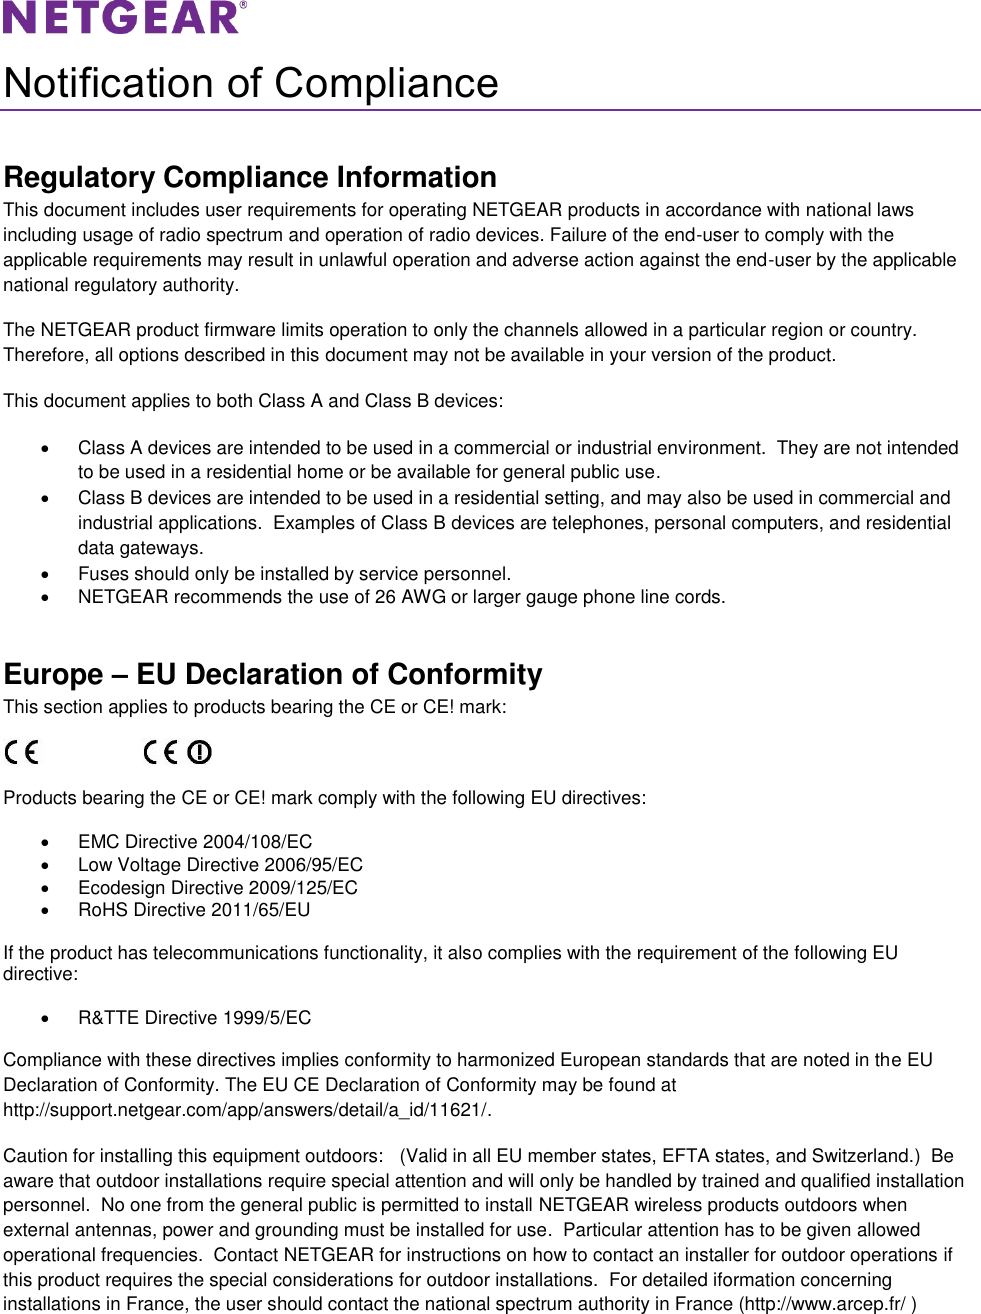   Notification of Compliance Regulatory Compliance Information This document includes user requirements for operating NETGEAR products in accordance with national laws including usage of radio spectrum and operation of radio devices. Failure of the end-user to comply with the applicable requirements may result in unlawful operation and adverse action against the end-user by the applicable national regulatory authority. The NETGEAR product firmware limits operation to only the channels allowed in a particular region or country. Therefore, all options described in this document may not be available in your version of the product. This document applies to both Class A and Class B devices:   Class A devices are intended to be used in a commercial or industrial environment.  They are not intended to be used in a residential home or be available for general public use.   Class B devices are intended to be used in a residential setting, and may also be used in commercial and industrial applications.  Examples of Class B devices are telephones, personal computers, and residential data gateways.   Fuses should only be installed by service personnel.   NETGEAR recommends the use of 26 AWG or larger gauge phone line cords. Europe – EU Declaration of Conformity This section applies to products bearing the CE or CE! mark:                      Products bearing the CE or CE! mark comply with the following EU directives:   EMC Directive 2004/108/EC   Low Voltage Directive 2006/95/EC   Ecodesign Directive 2009/125/EC   RoHS Directive 2011/65/EU If the product has telecommunications functionality, it also complies with the requirement of the following EU directive:   R&amp;TTE Directive 1999/5/EC Compliance with these directives implies conformity to harmonized European standards that are noted in the EU Declaration of Conformity. The EU CE Declaration of Conformity may be found at http://support.netgear.com/app/answers/detail/a_id/11621/. Caution for installing this equipment outdoors:   (Valid in all EU member states, EFTA states, and Switzerland.)  Be aware that outdoor installations require special attention and will only be handled by trained and qualified installation personnel.  No one from the general public is permitted to install NETGEAR wireless products outdoors when external antennas, power and grounding must be installed for use.  Particular attention has to be given allowed operational frequencies.  Contact NETGEAR for instructions on how to contact an installer for outdoor operations if this product requires the special considerations for outdoor installations.  For detailed iformation concerning installations in France, the user should contact the national spectrum authority in France (http://www.arcep.fr/ ) 